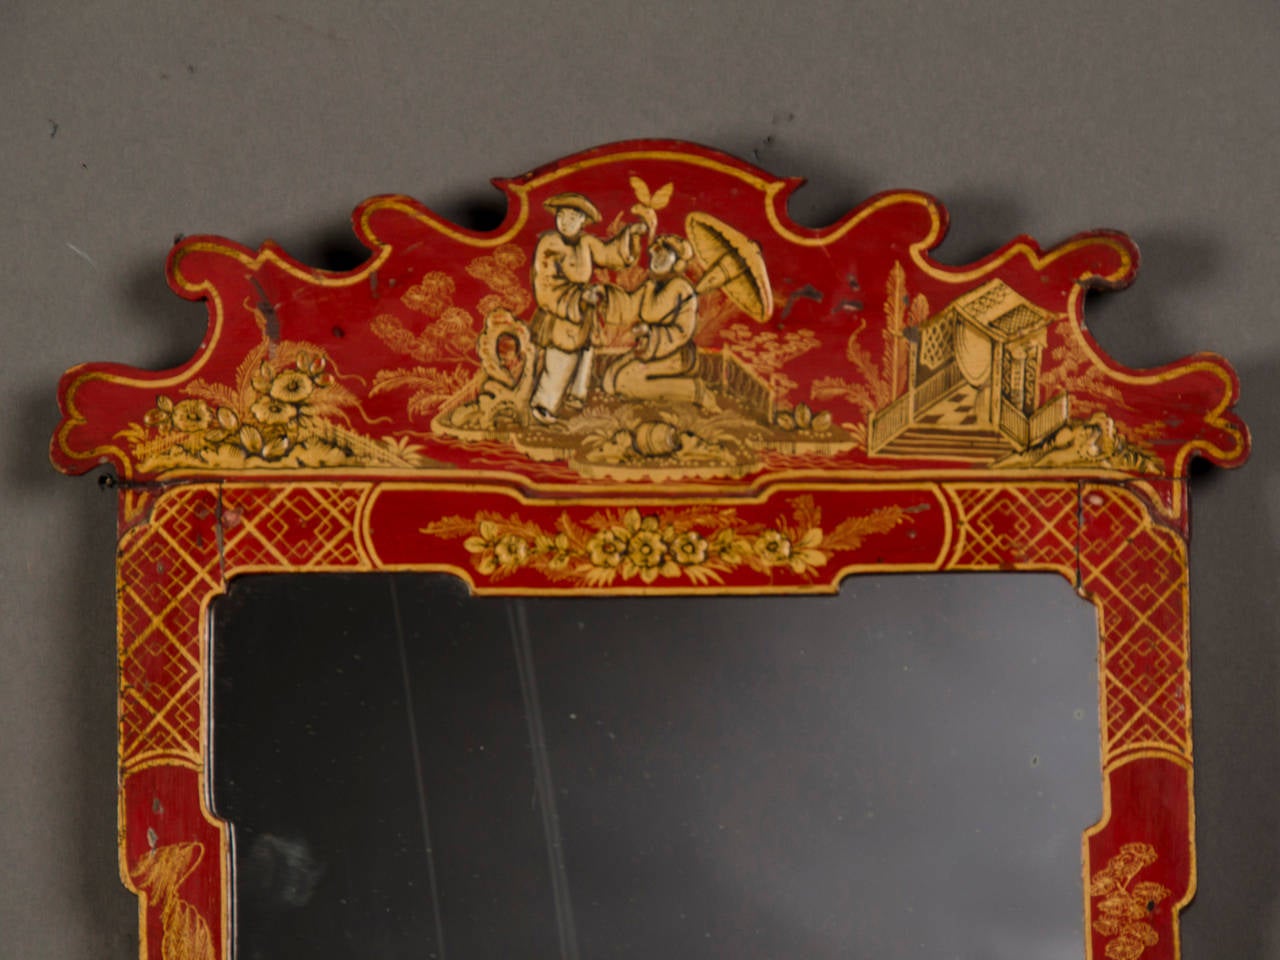 Receive our new selections direct from 1stdibs by email each week. Please click Follow Dealer below and see them first!

A slender antique English George II style scarlet coloured Chinoiserie decorated frame enclosing the original mirror glass